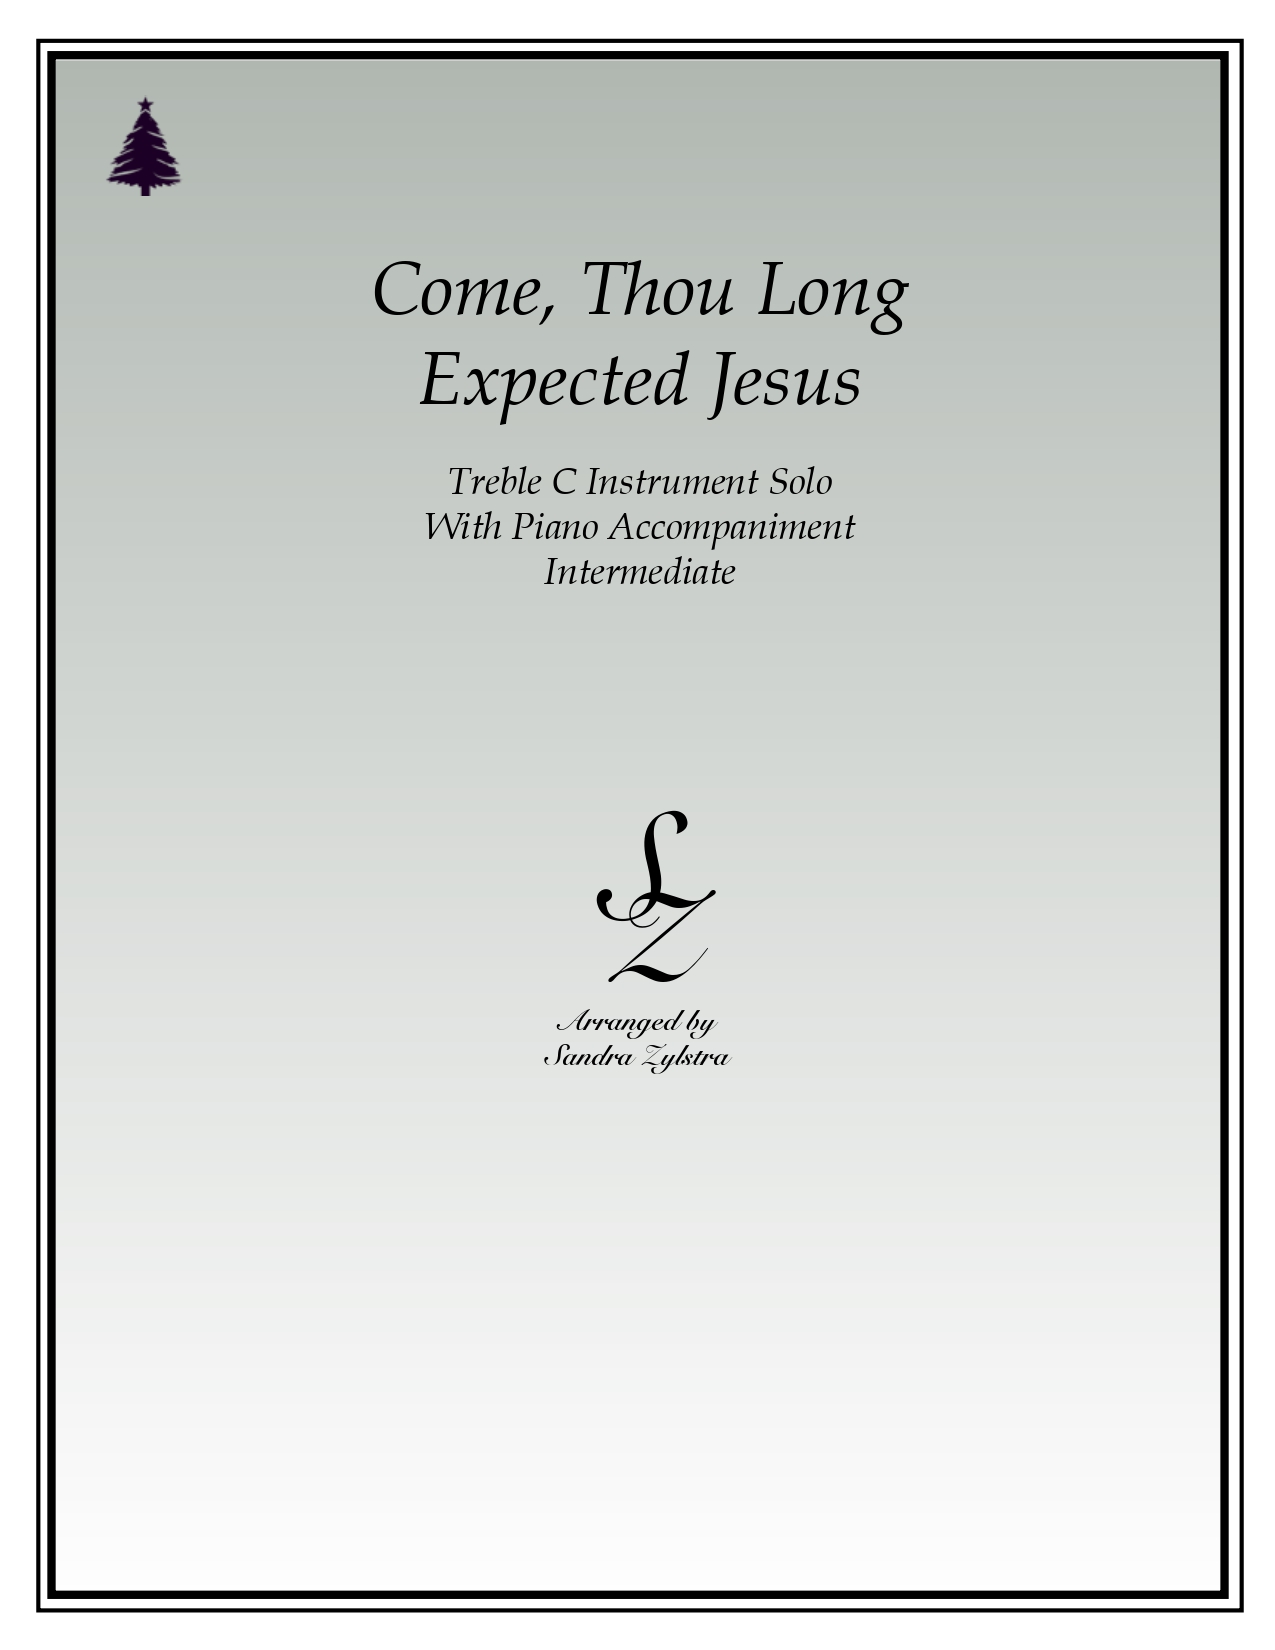 Come Thou Long Expected Jesus treble C instrument solo part cover page 00011